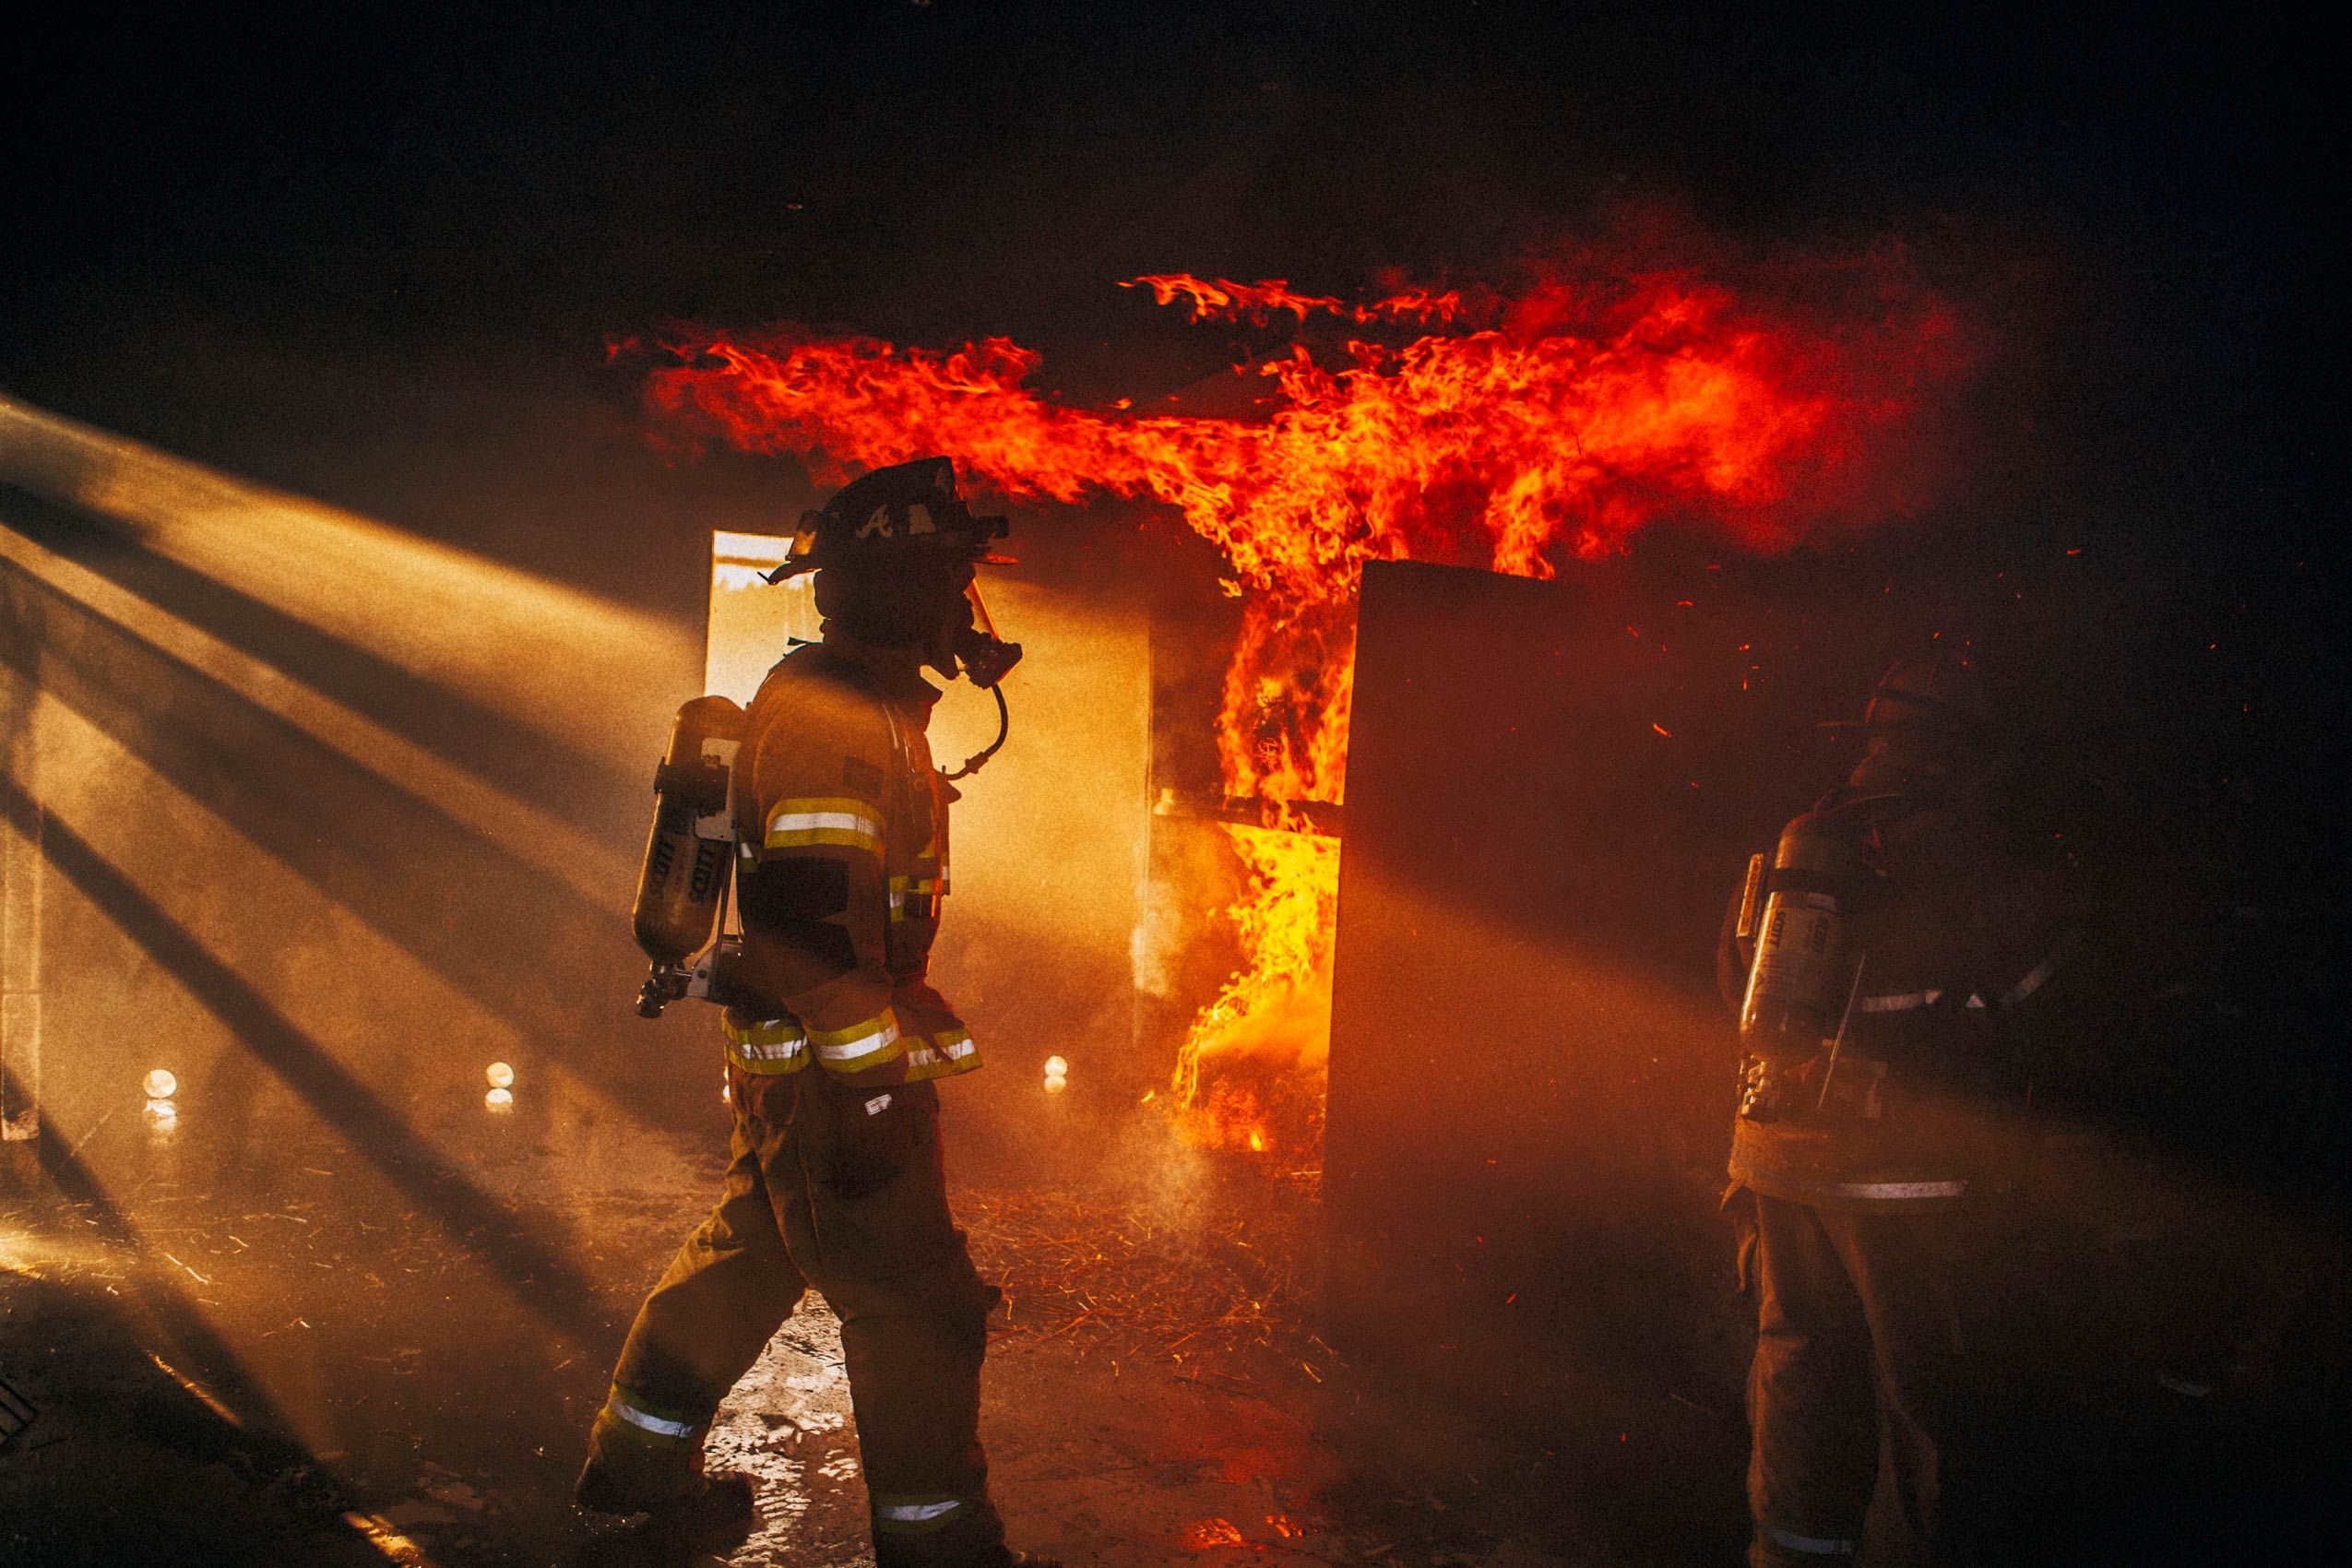 Firman Walks Through a Burning Building With Flames